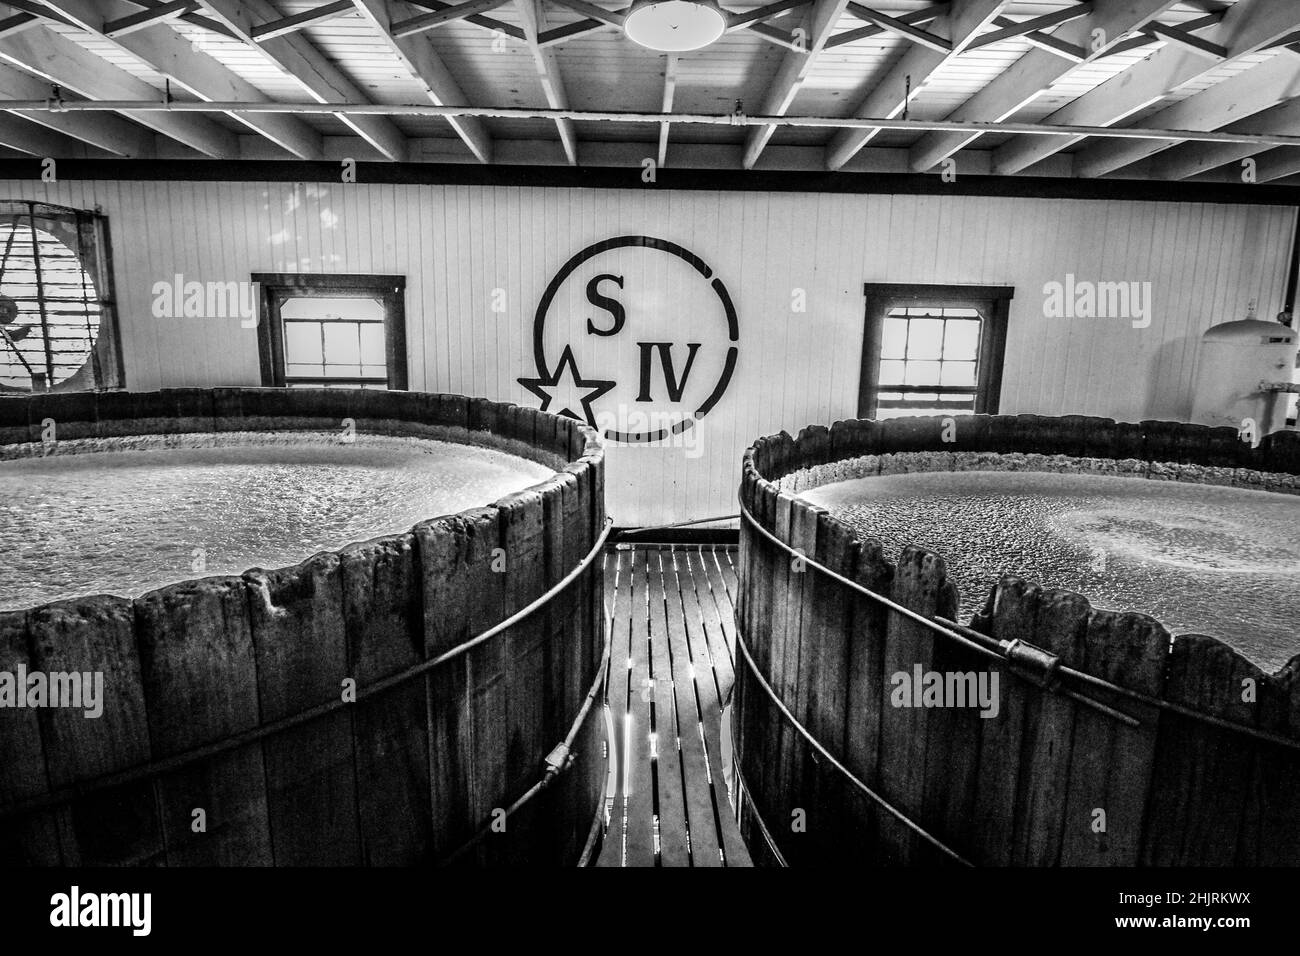 Watching bourbon ferment in these old wooden fermenters in Kentucky. Stock Photo